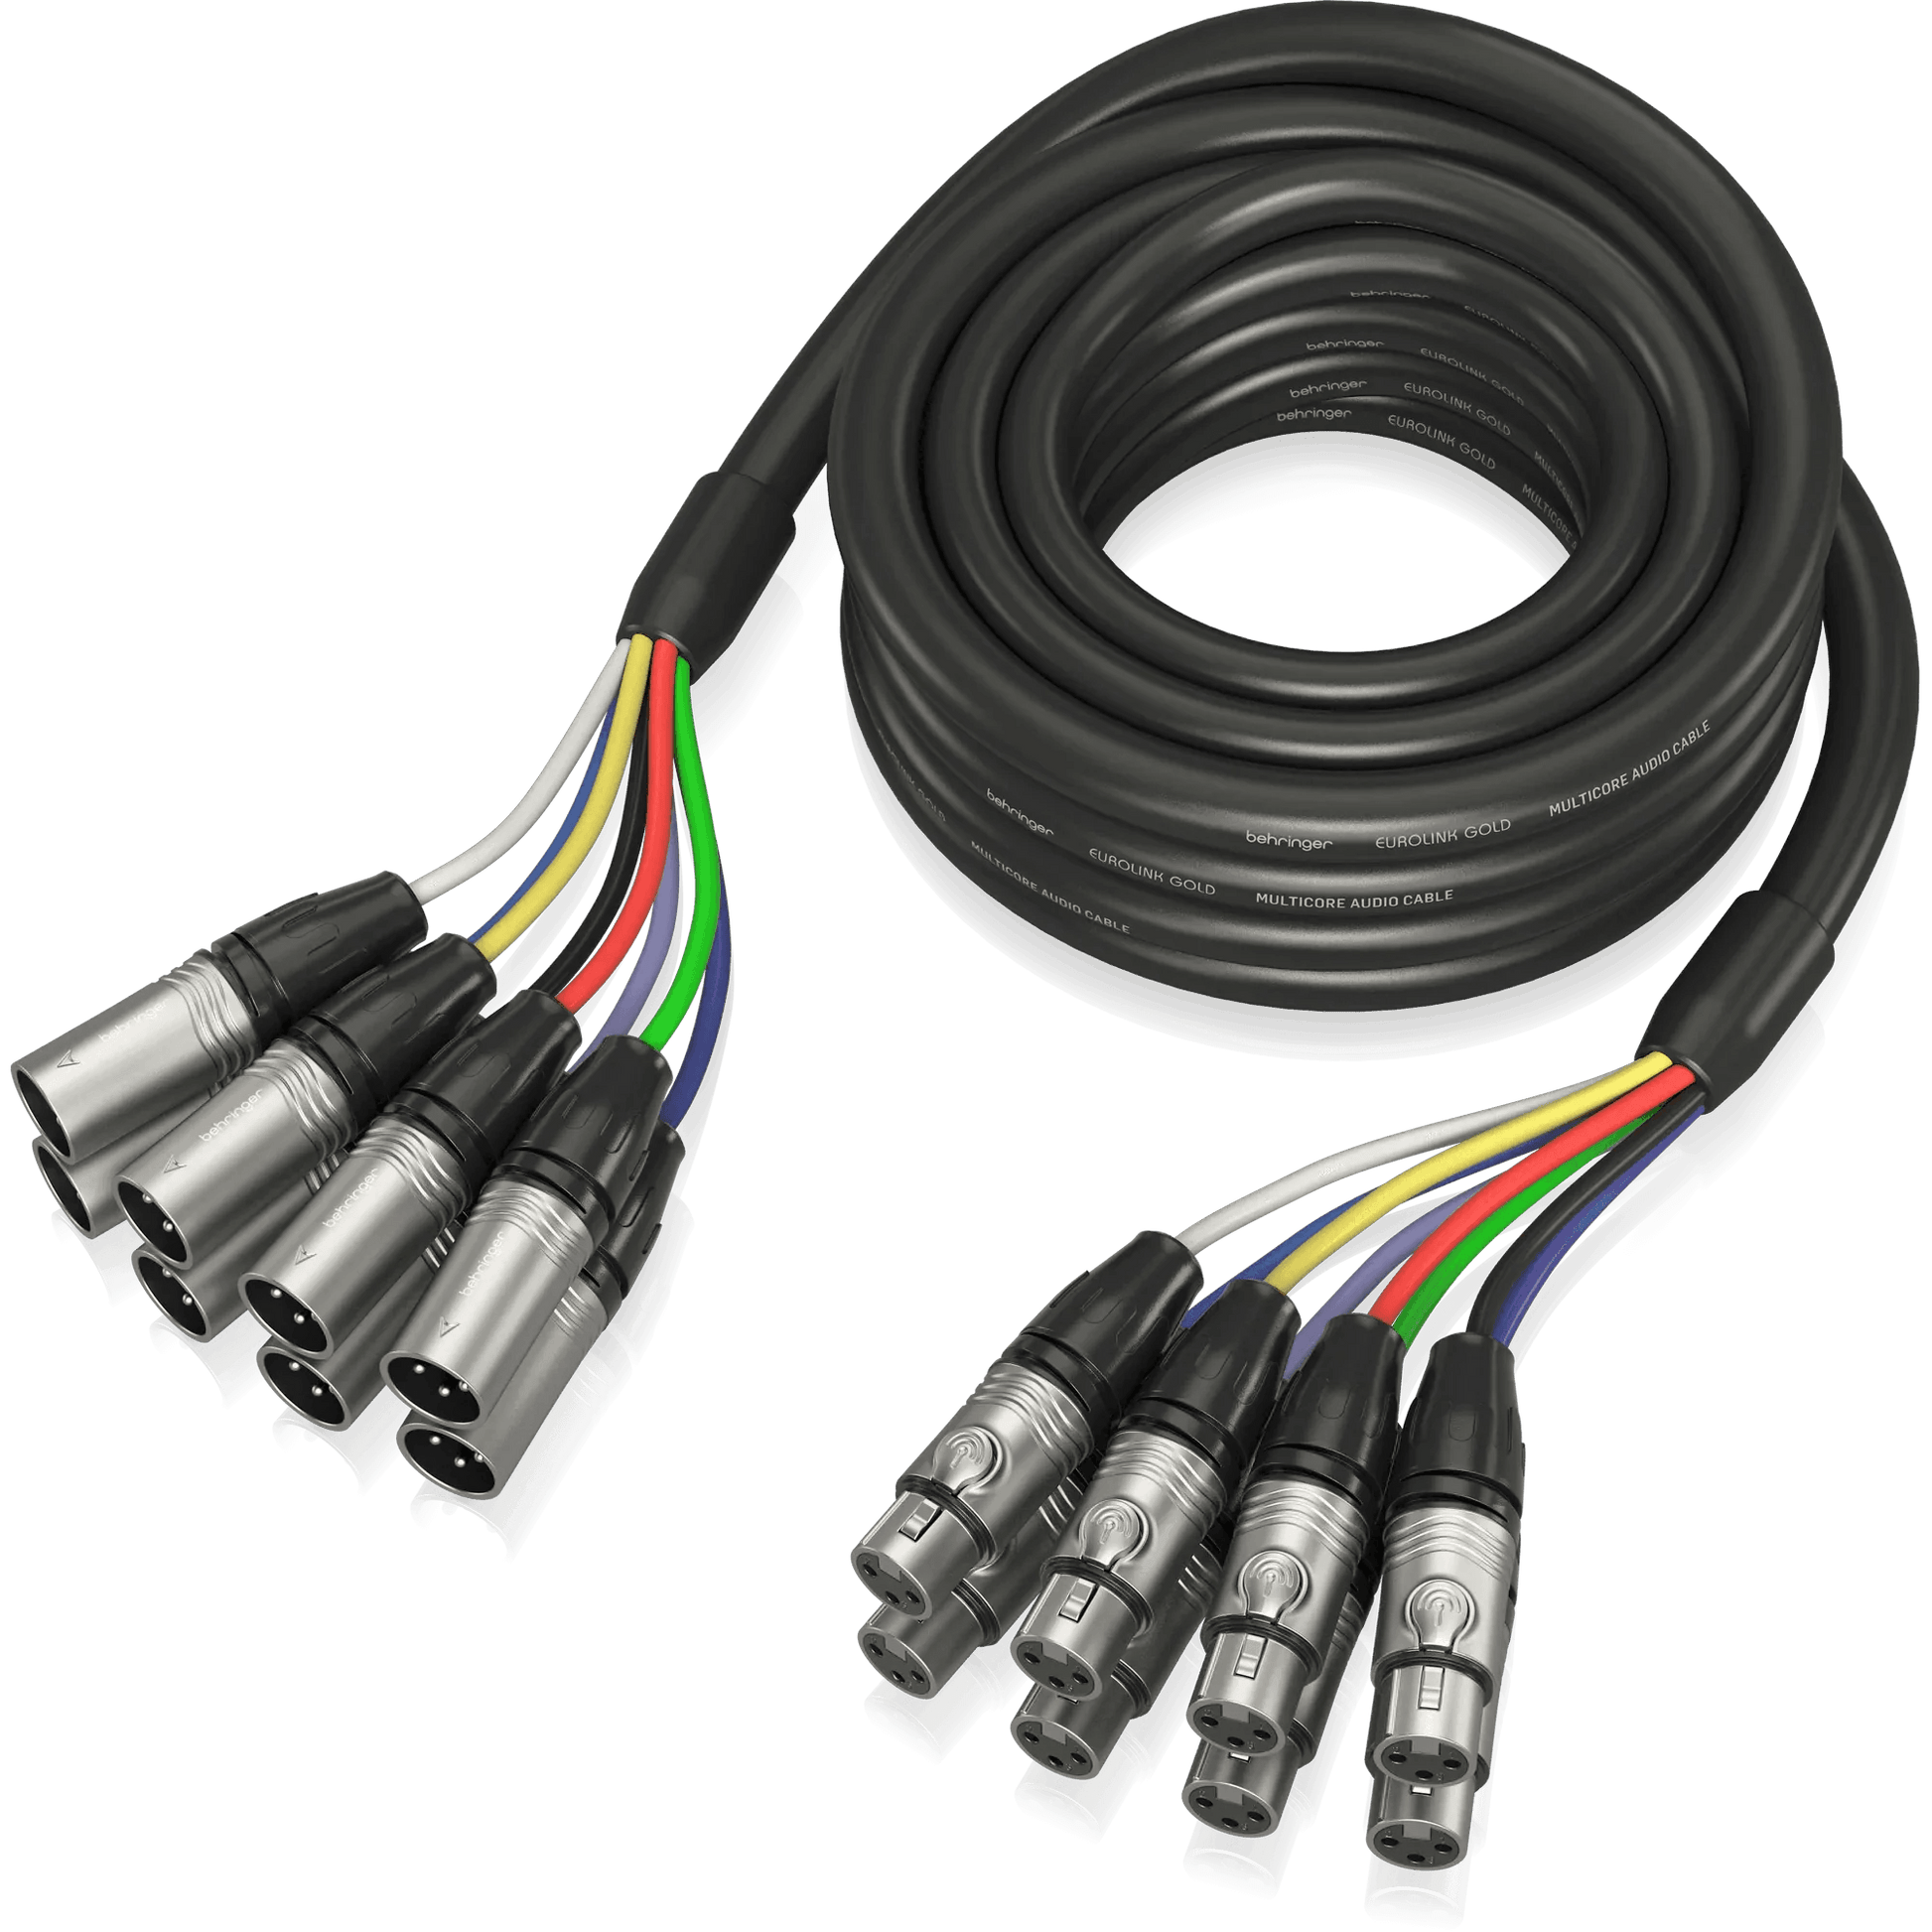 Behringer GMX-500 Gold Performance 5 m (16.4 ft) 8-Way Multicore Cable with XLR Connectors